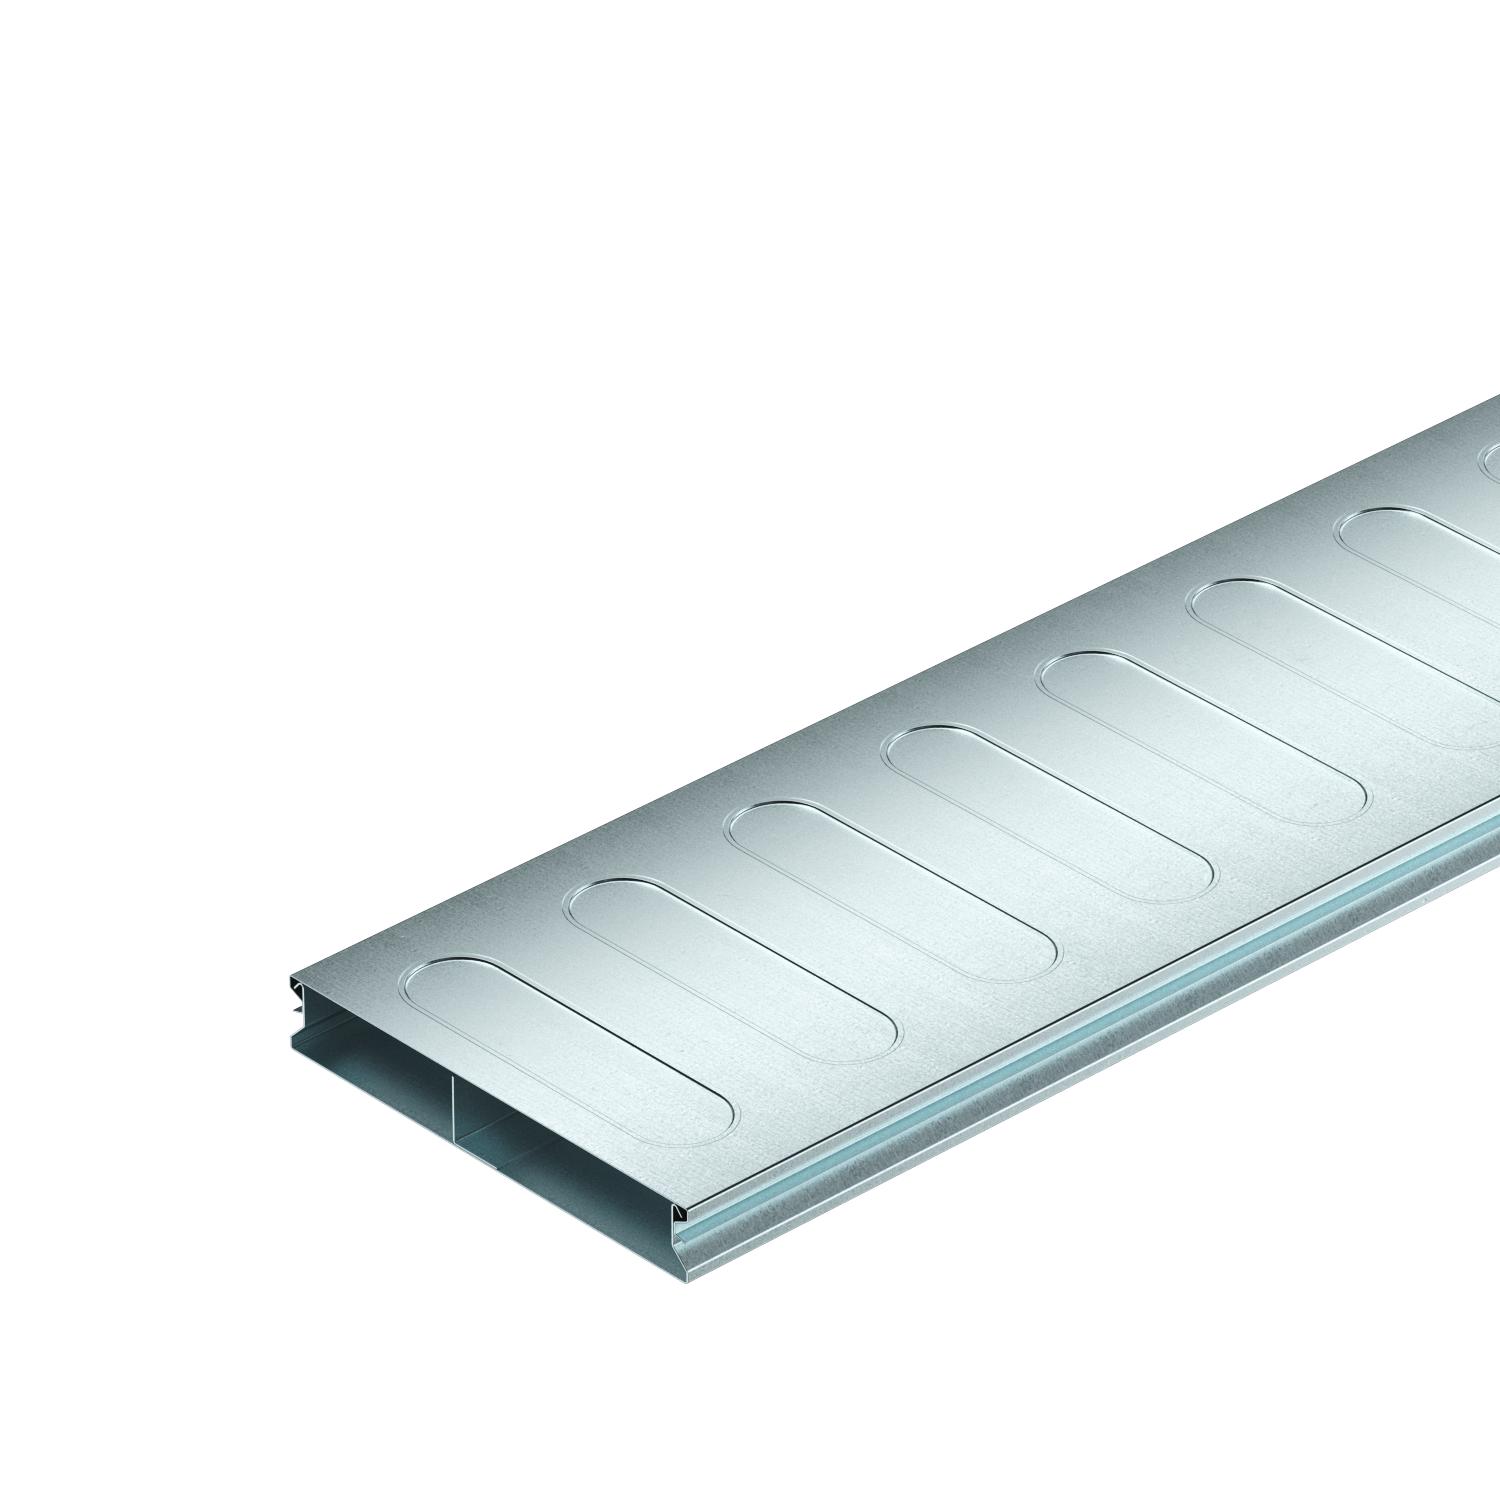 Underfloor duct, 2 pieces, 2-compartment, duct height 28 mm 2000 